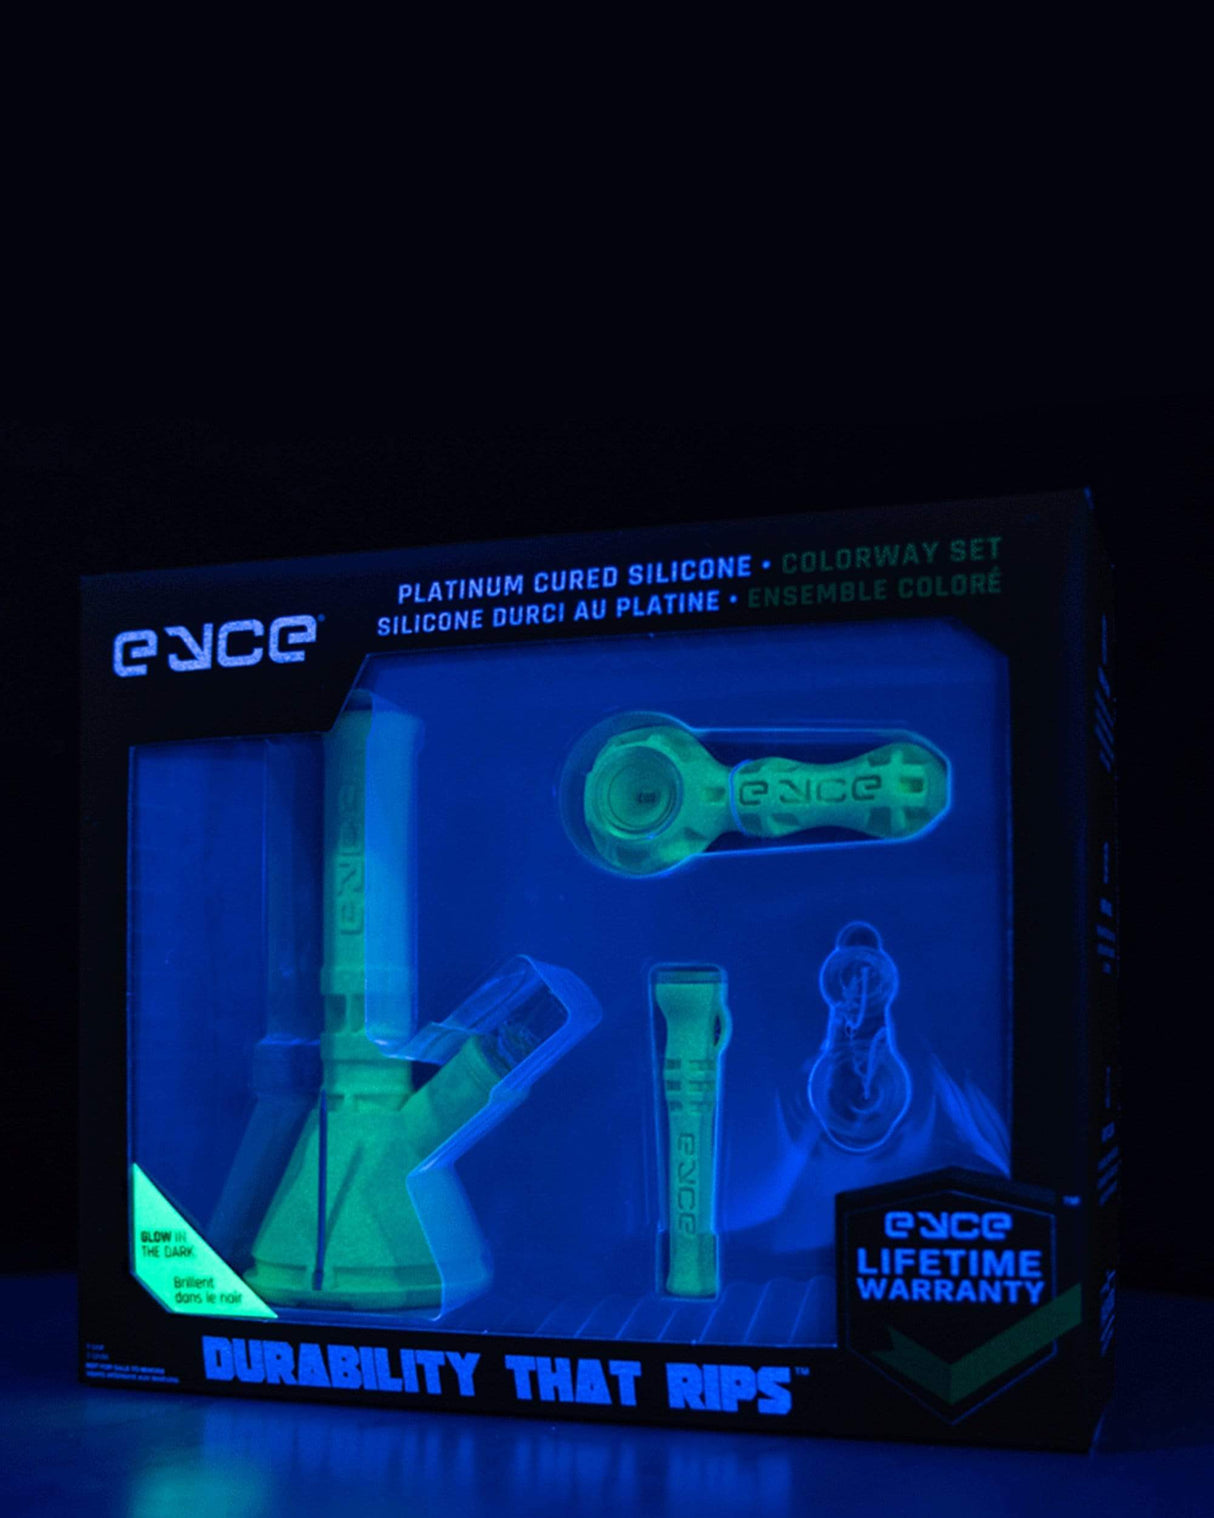 Eyce Colorway Boxed Set glowing in the dark, showcasing durable silicone bong and accessories